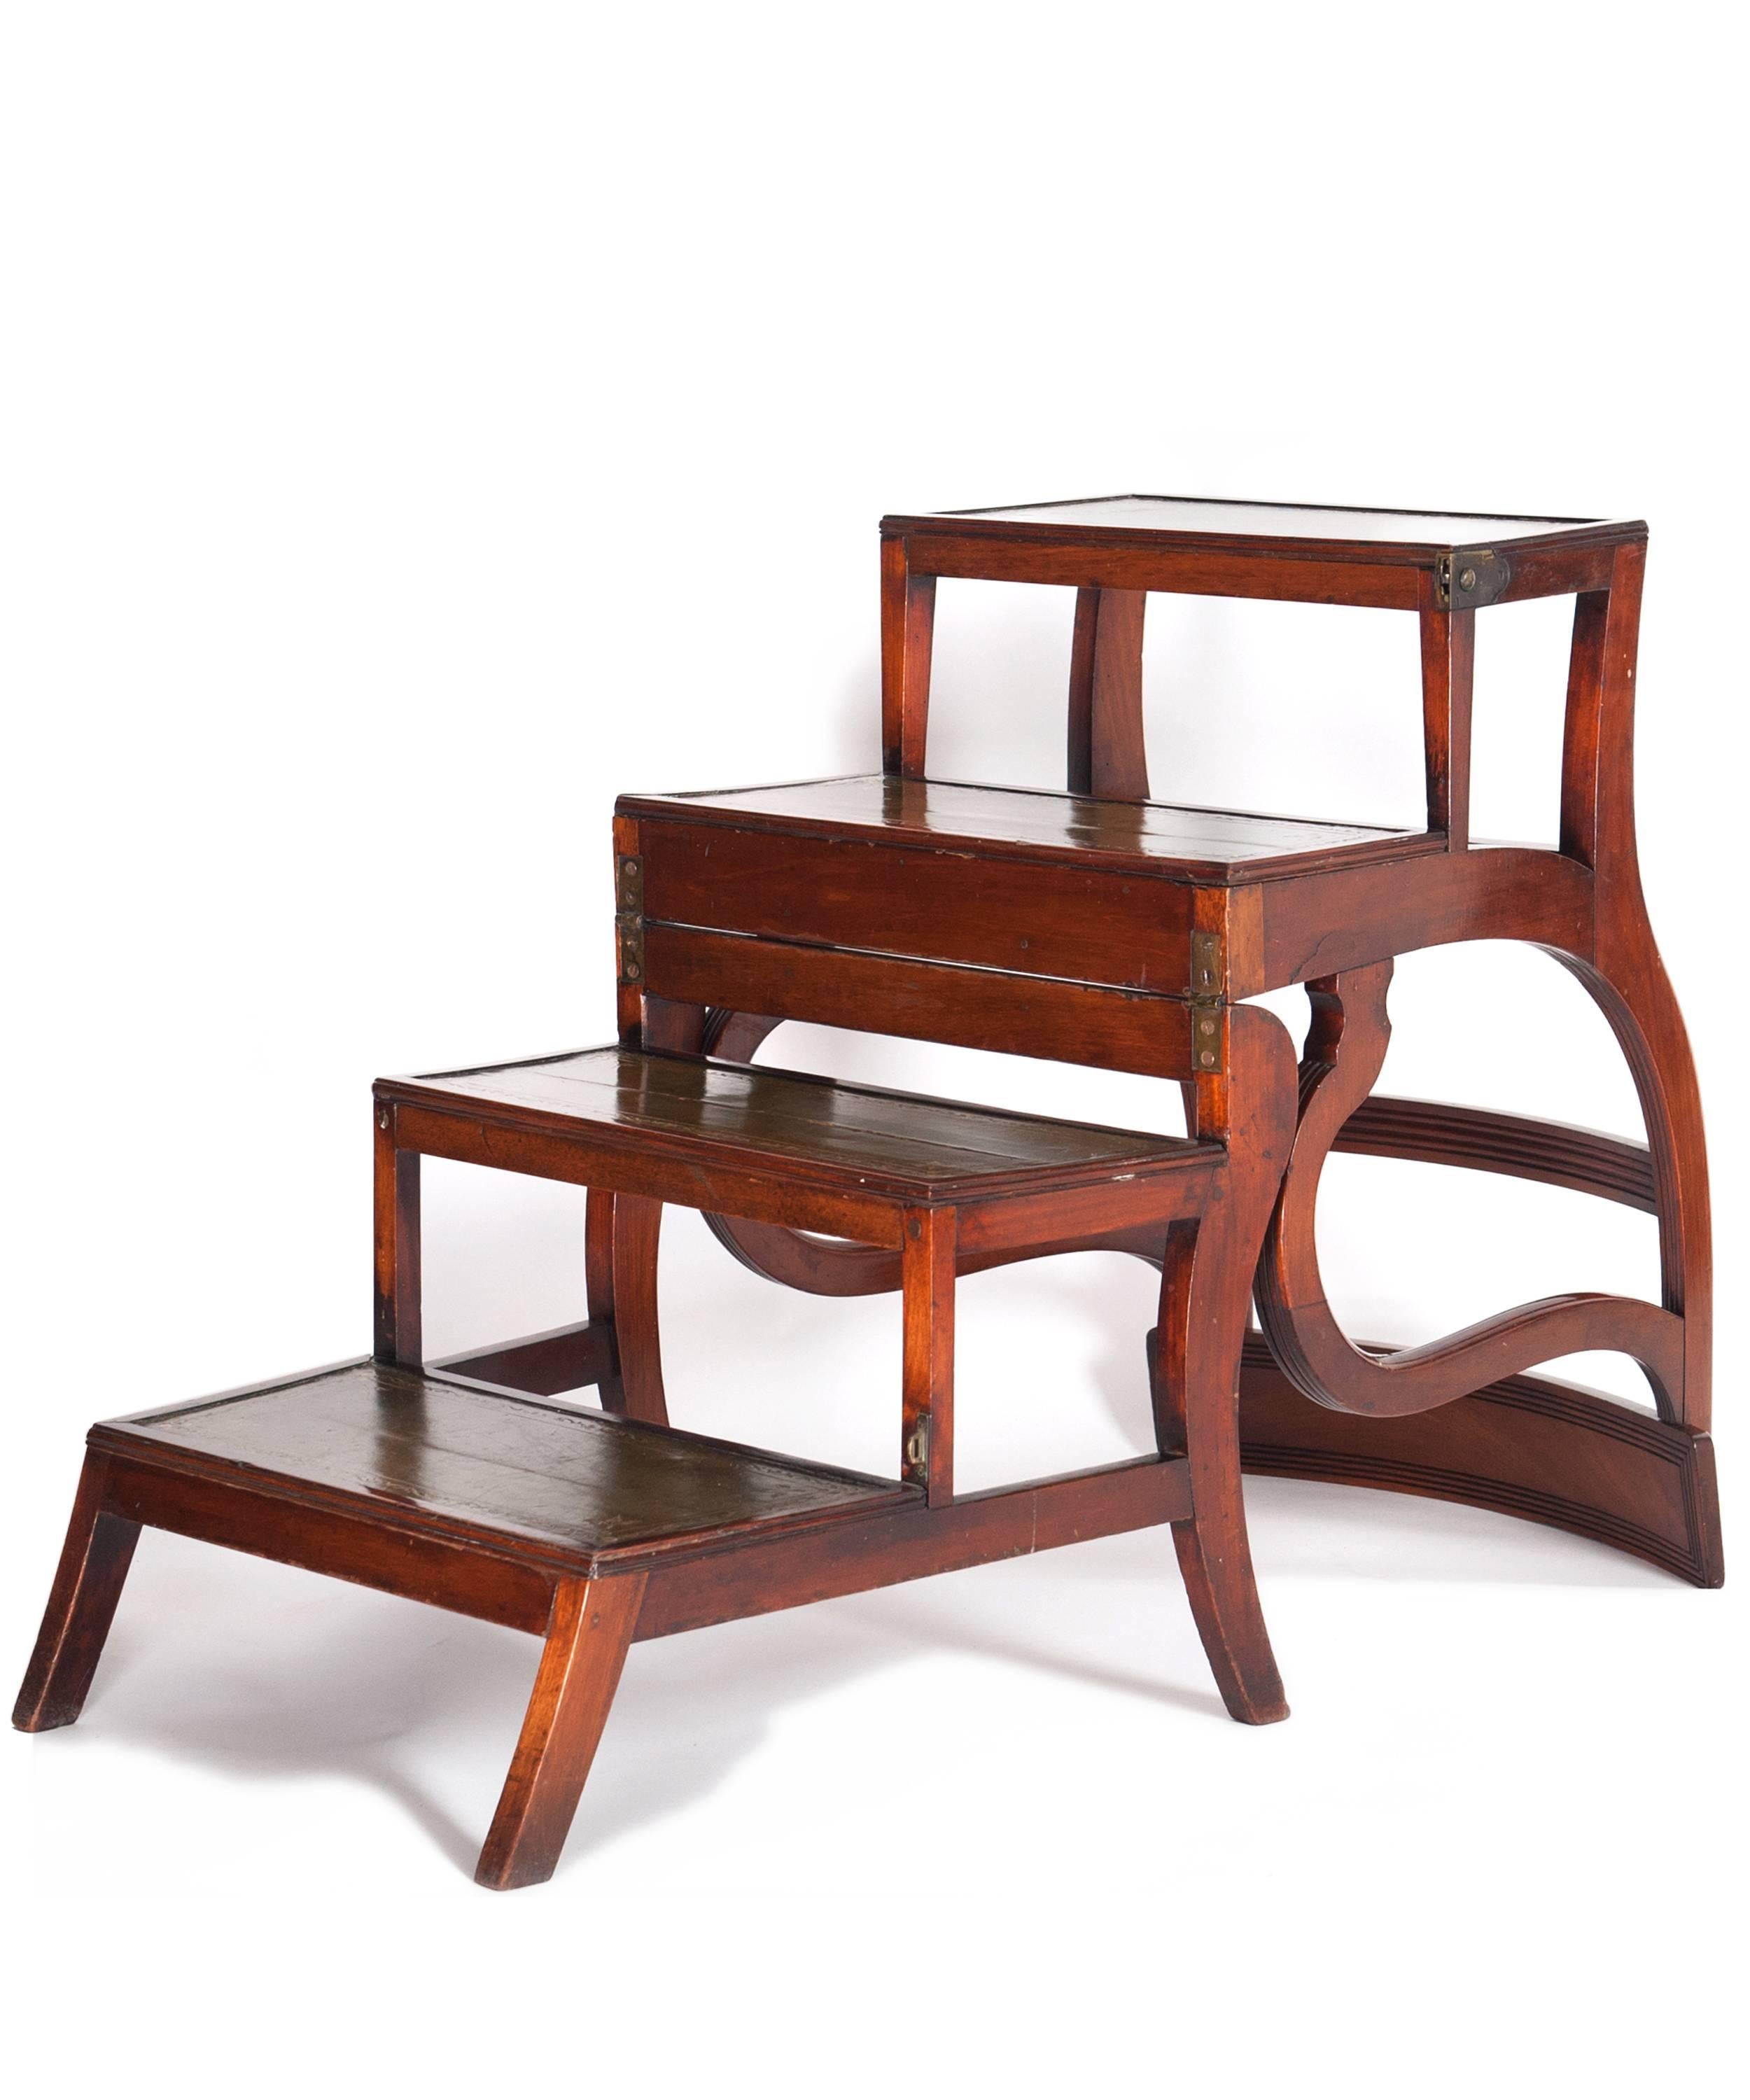 A good metamorphic English library chair or steps, after patented design by Morgan & Sanders.
With four stair steps, three inlaid with green leather
Canned reed seat
Scrolled arms
Molded front
Raised on sabre legs
When folded into a chair,